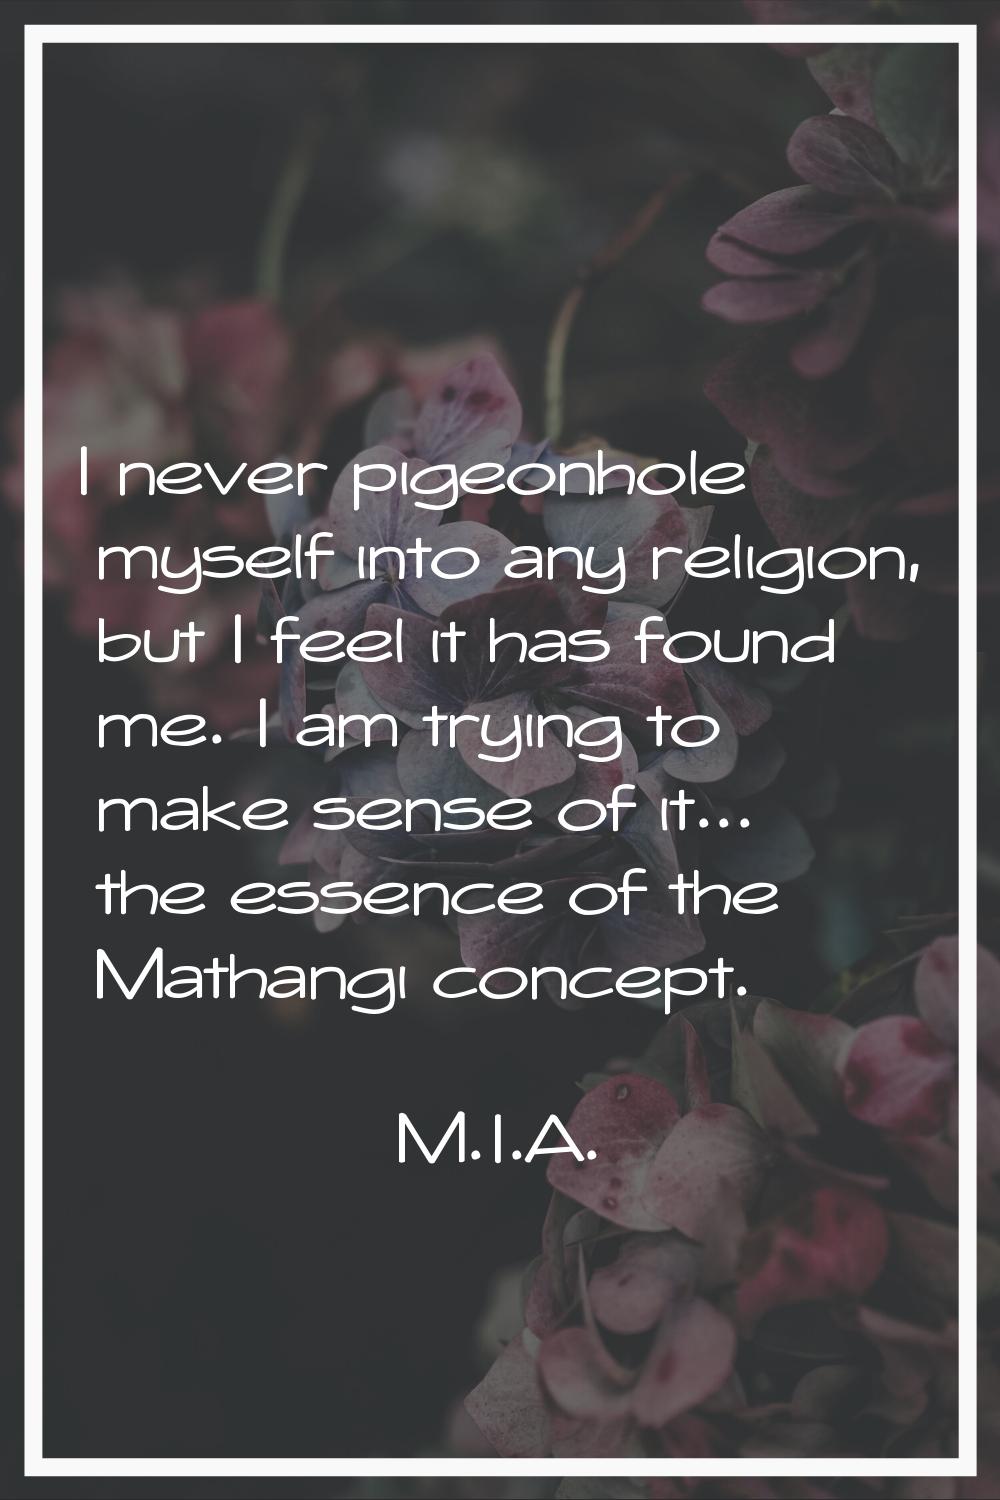 I never pigeonhole myself into any religion, but I feel it has found me. I am trying to make sense 